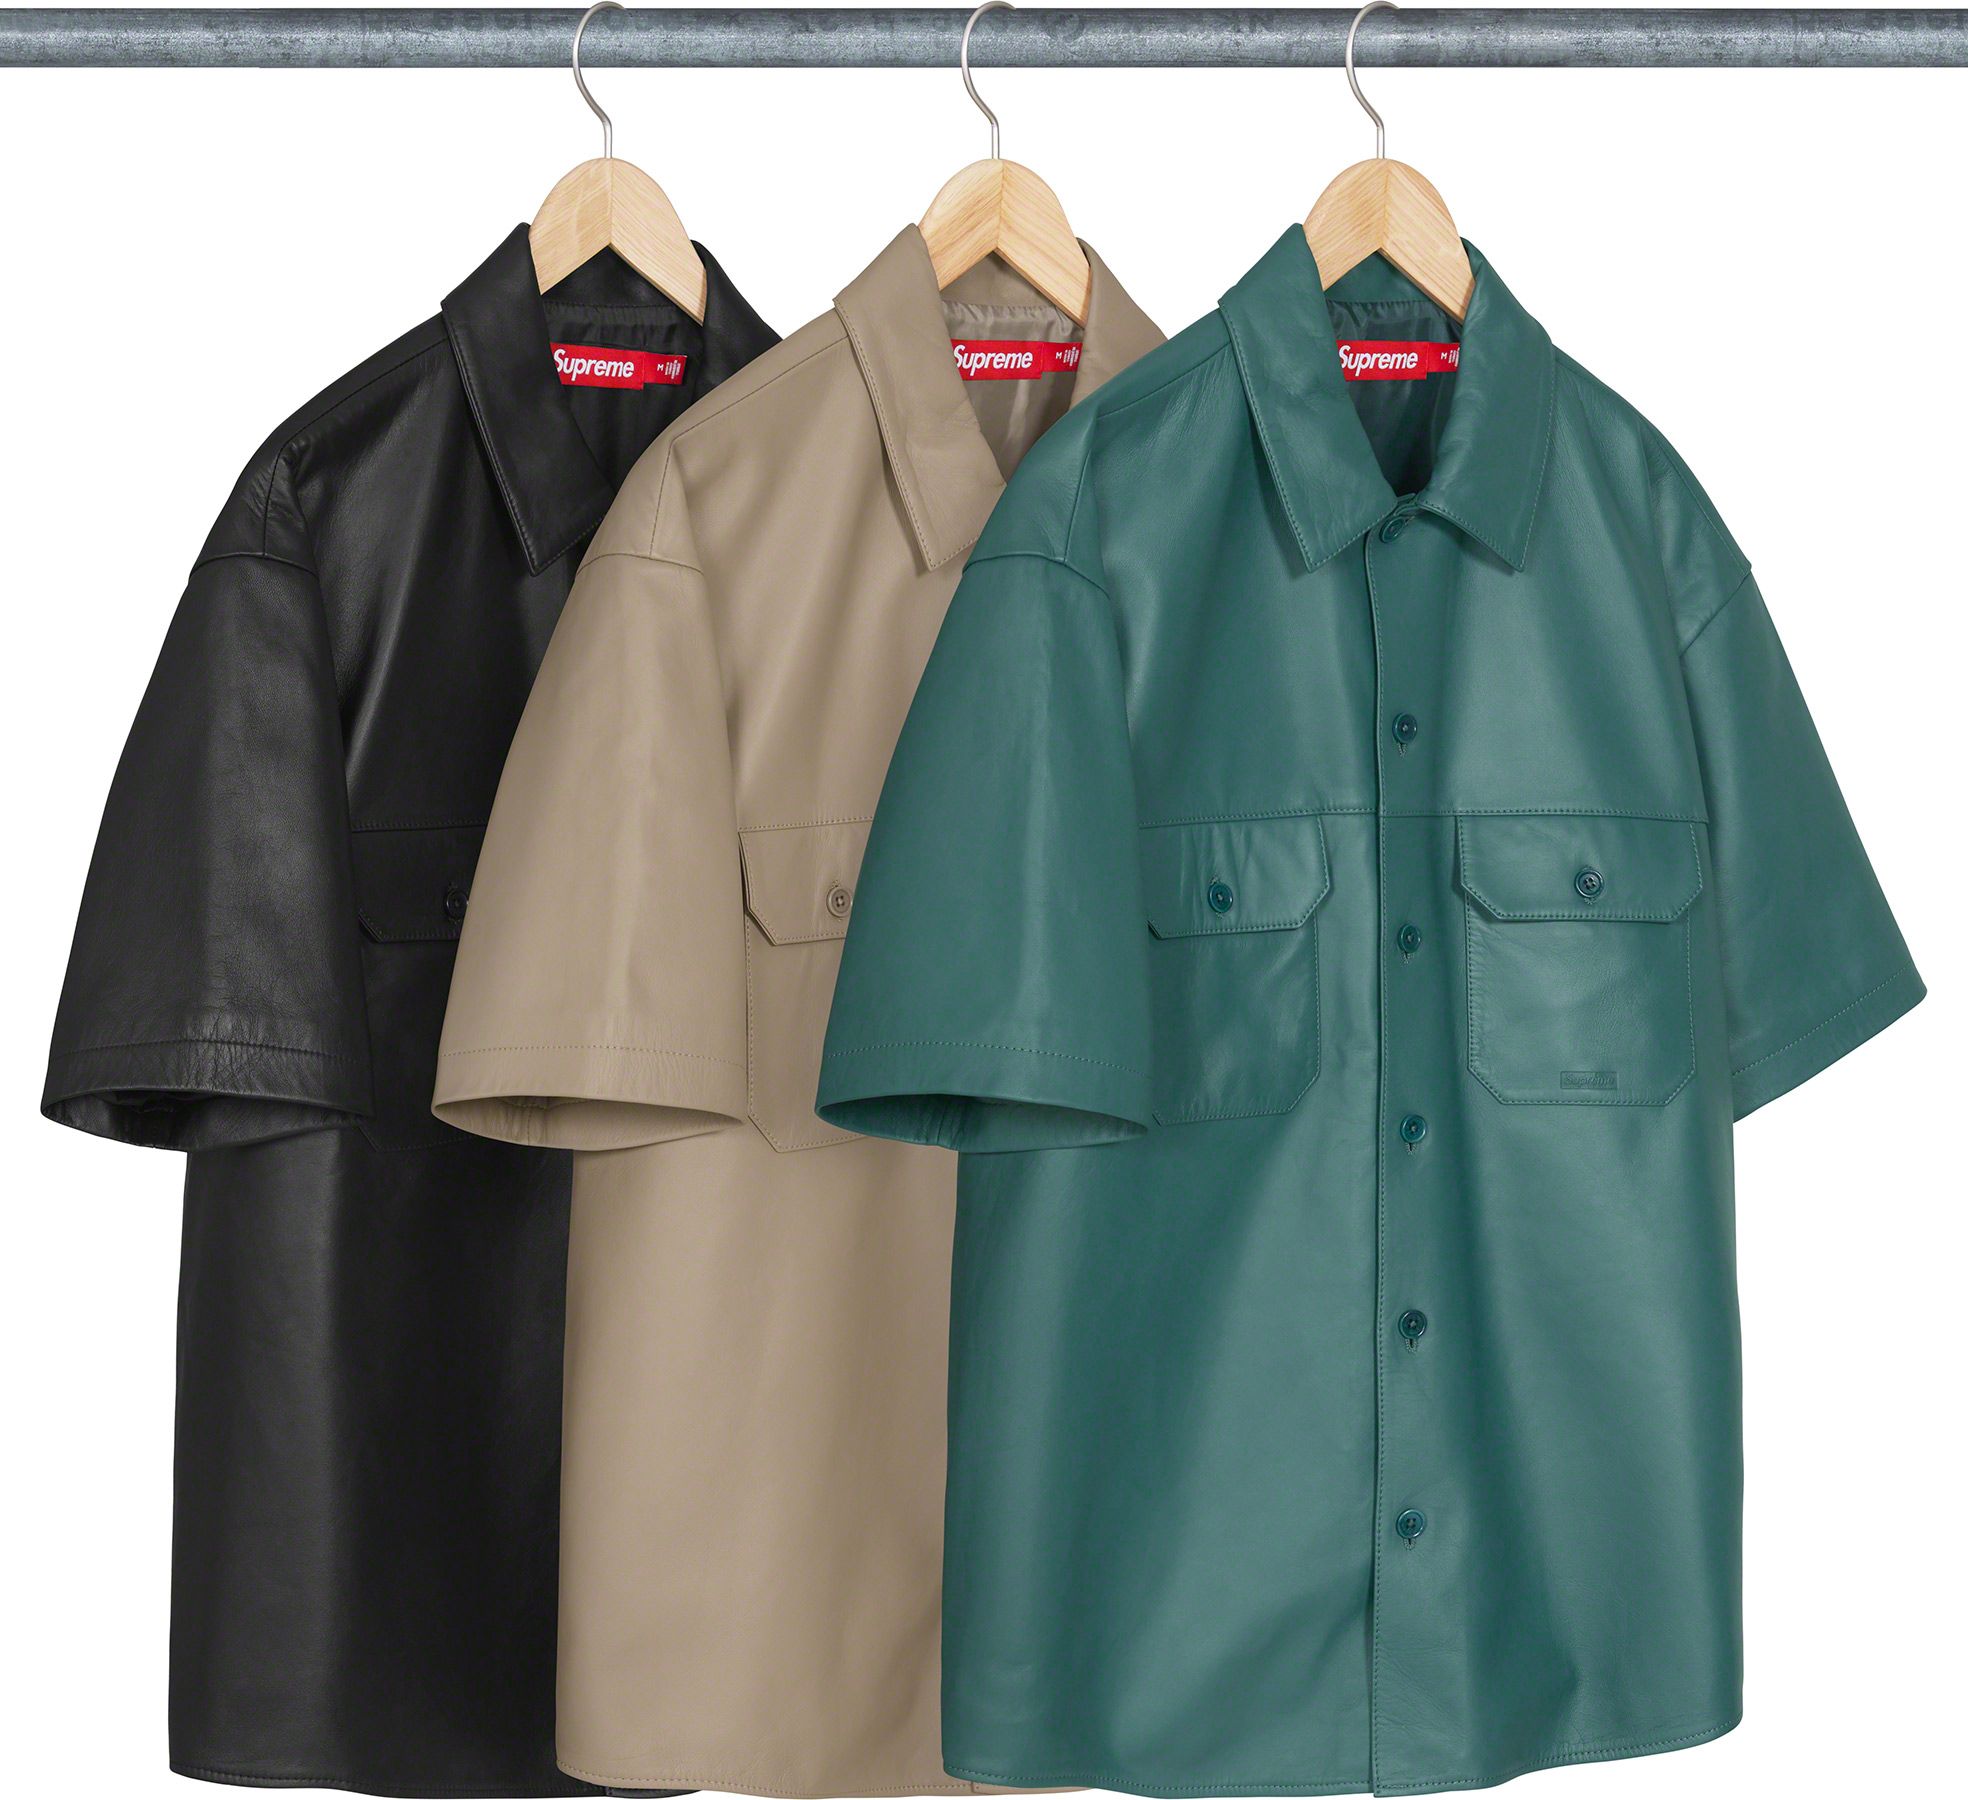 American Psycho Work Shirt - Fall/Winter 2023 Preview – Supreme